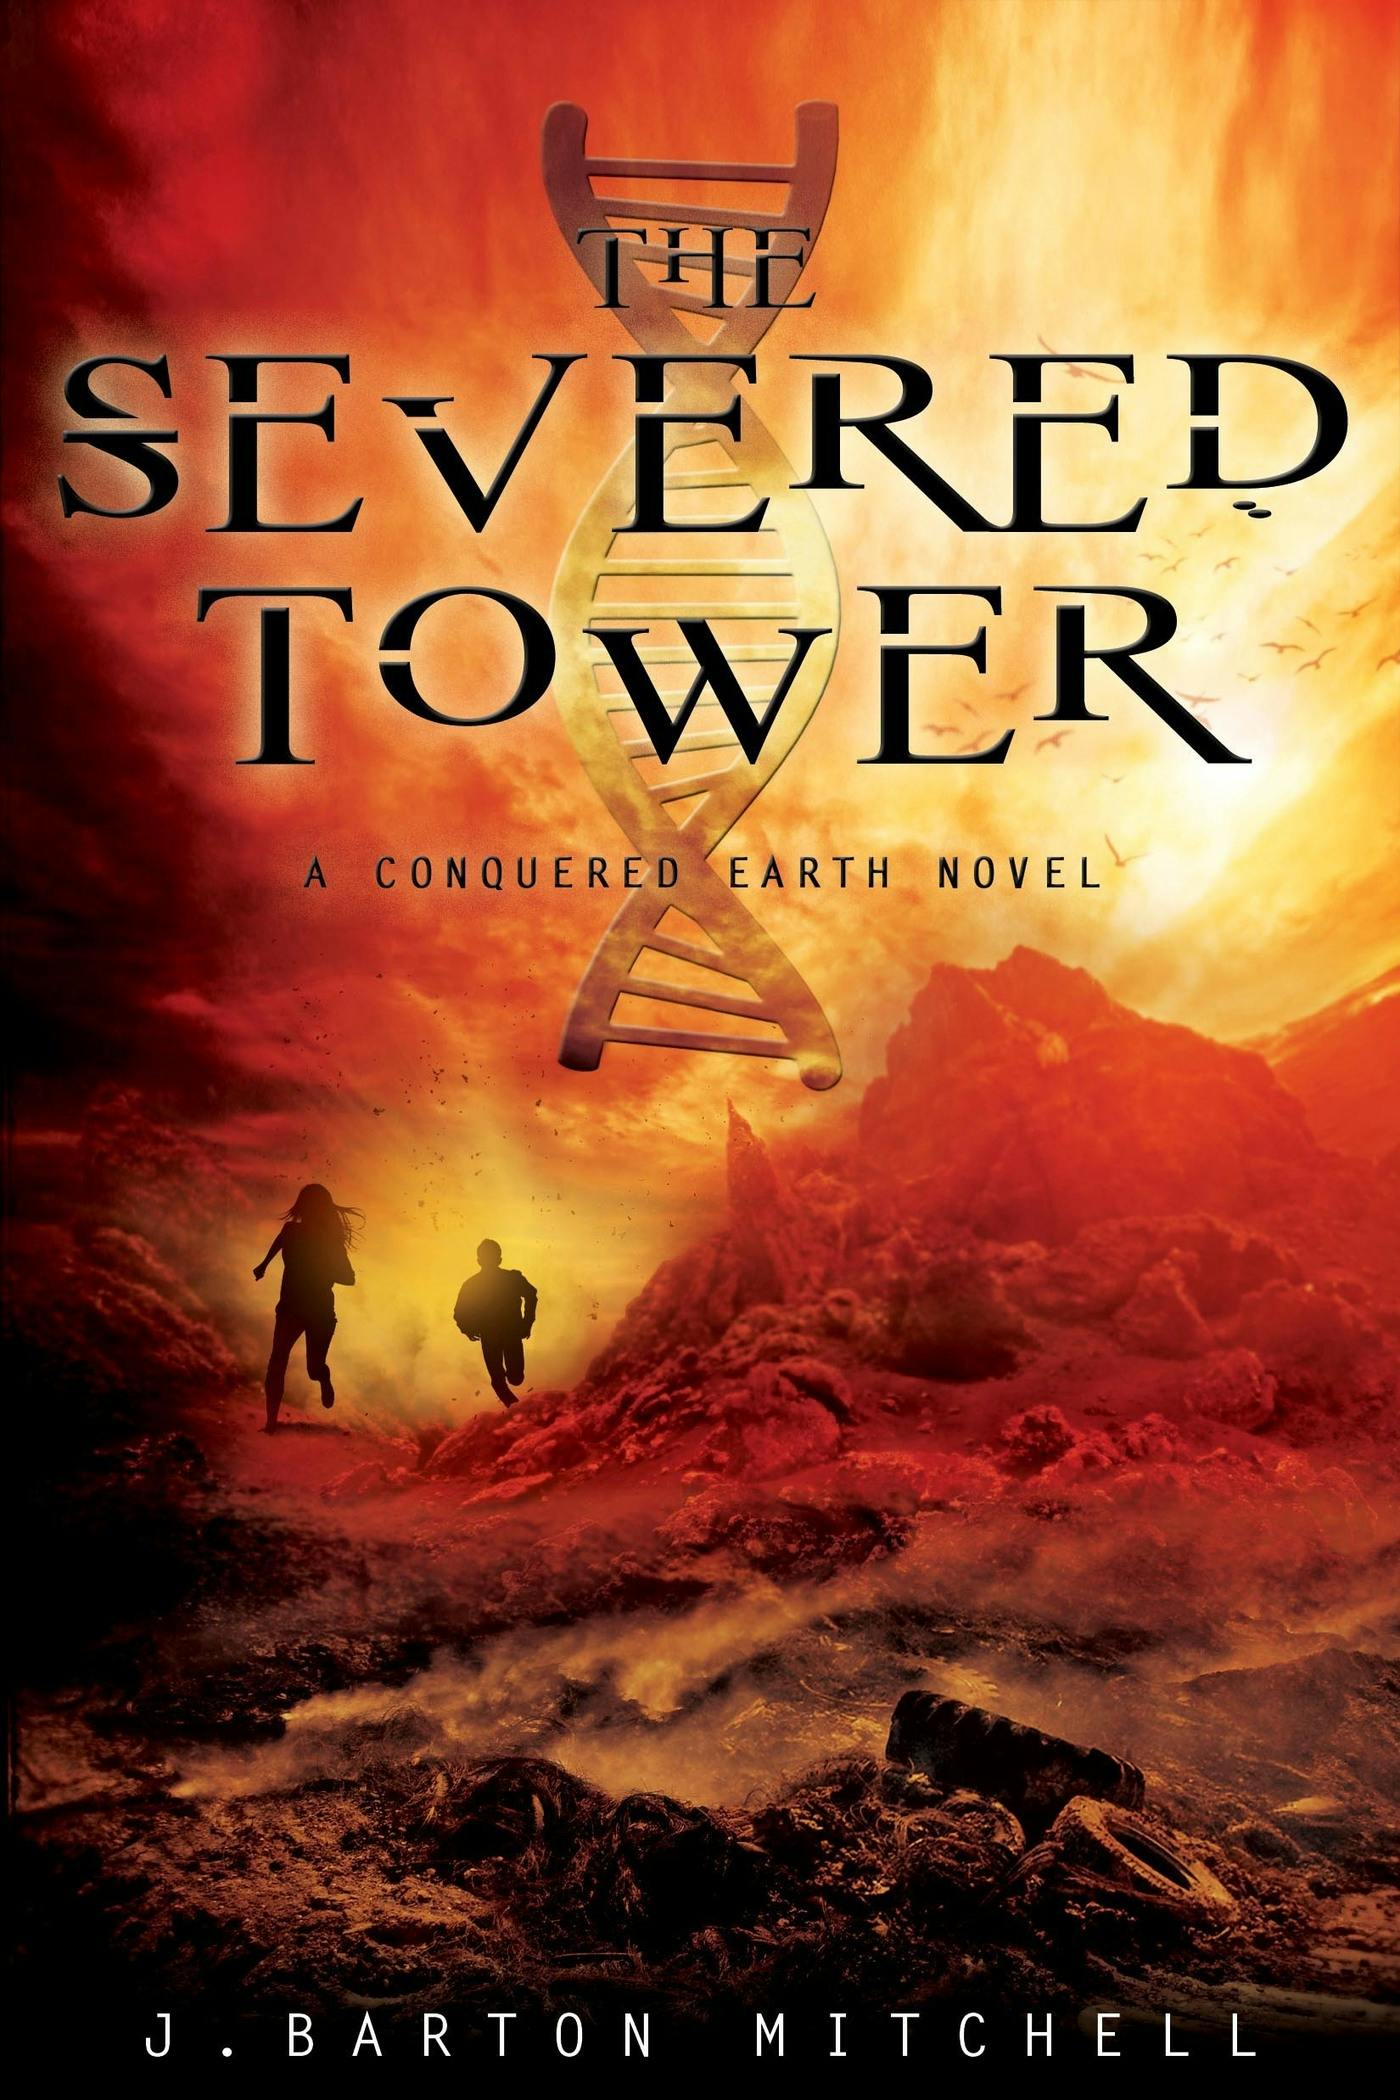 Image of The Severed Tower